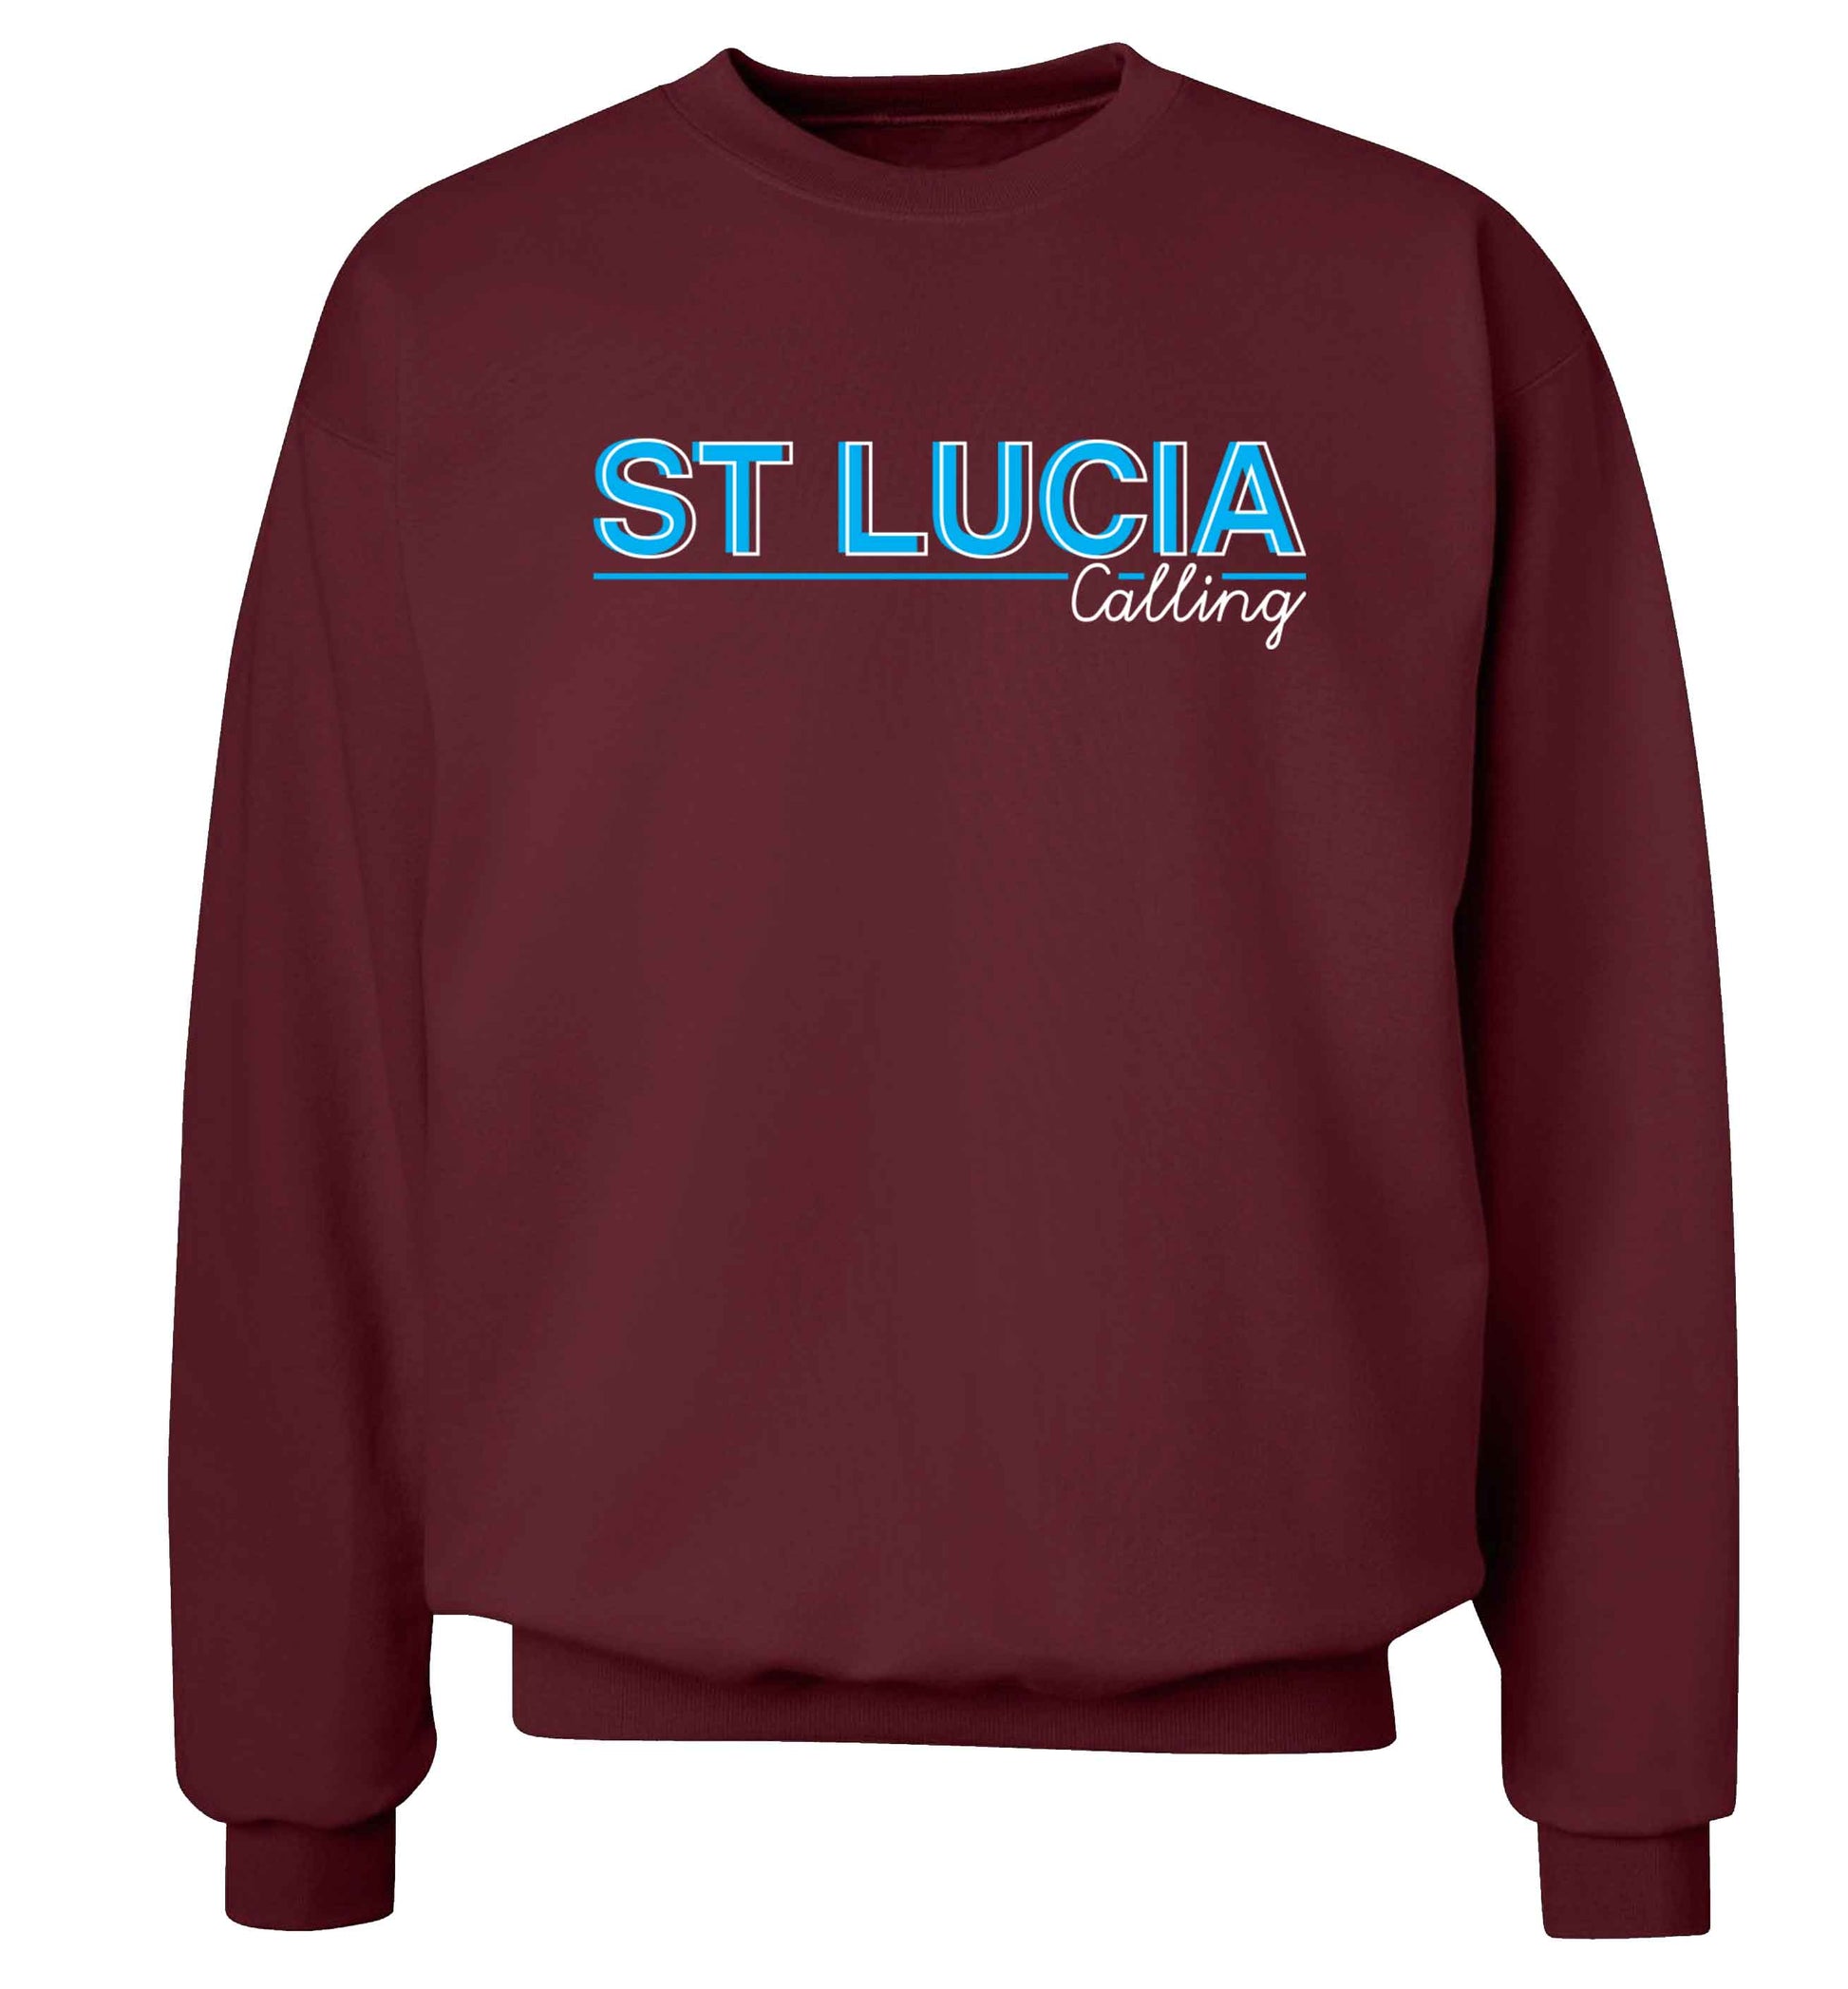 St Lucia calling Adult's unisex maroon Sweater 2XL